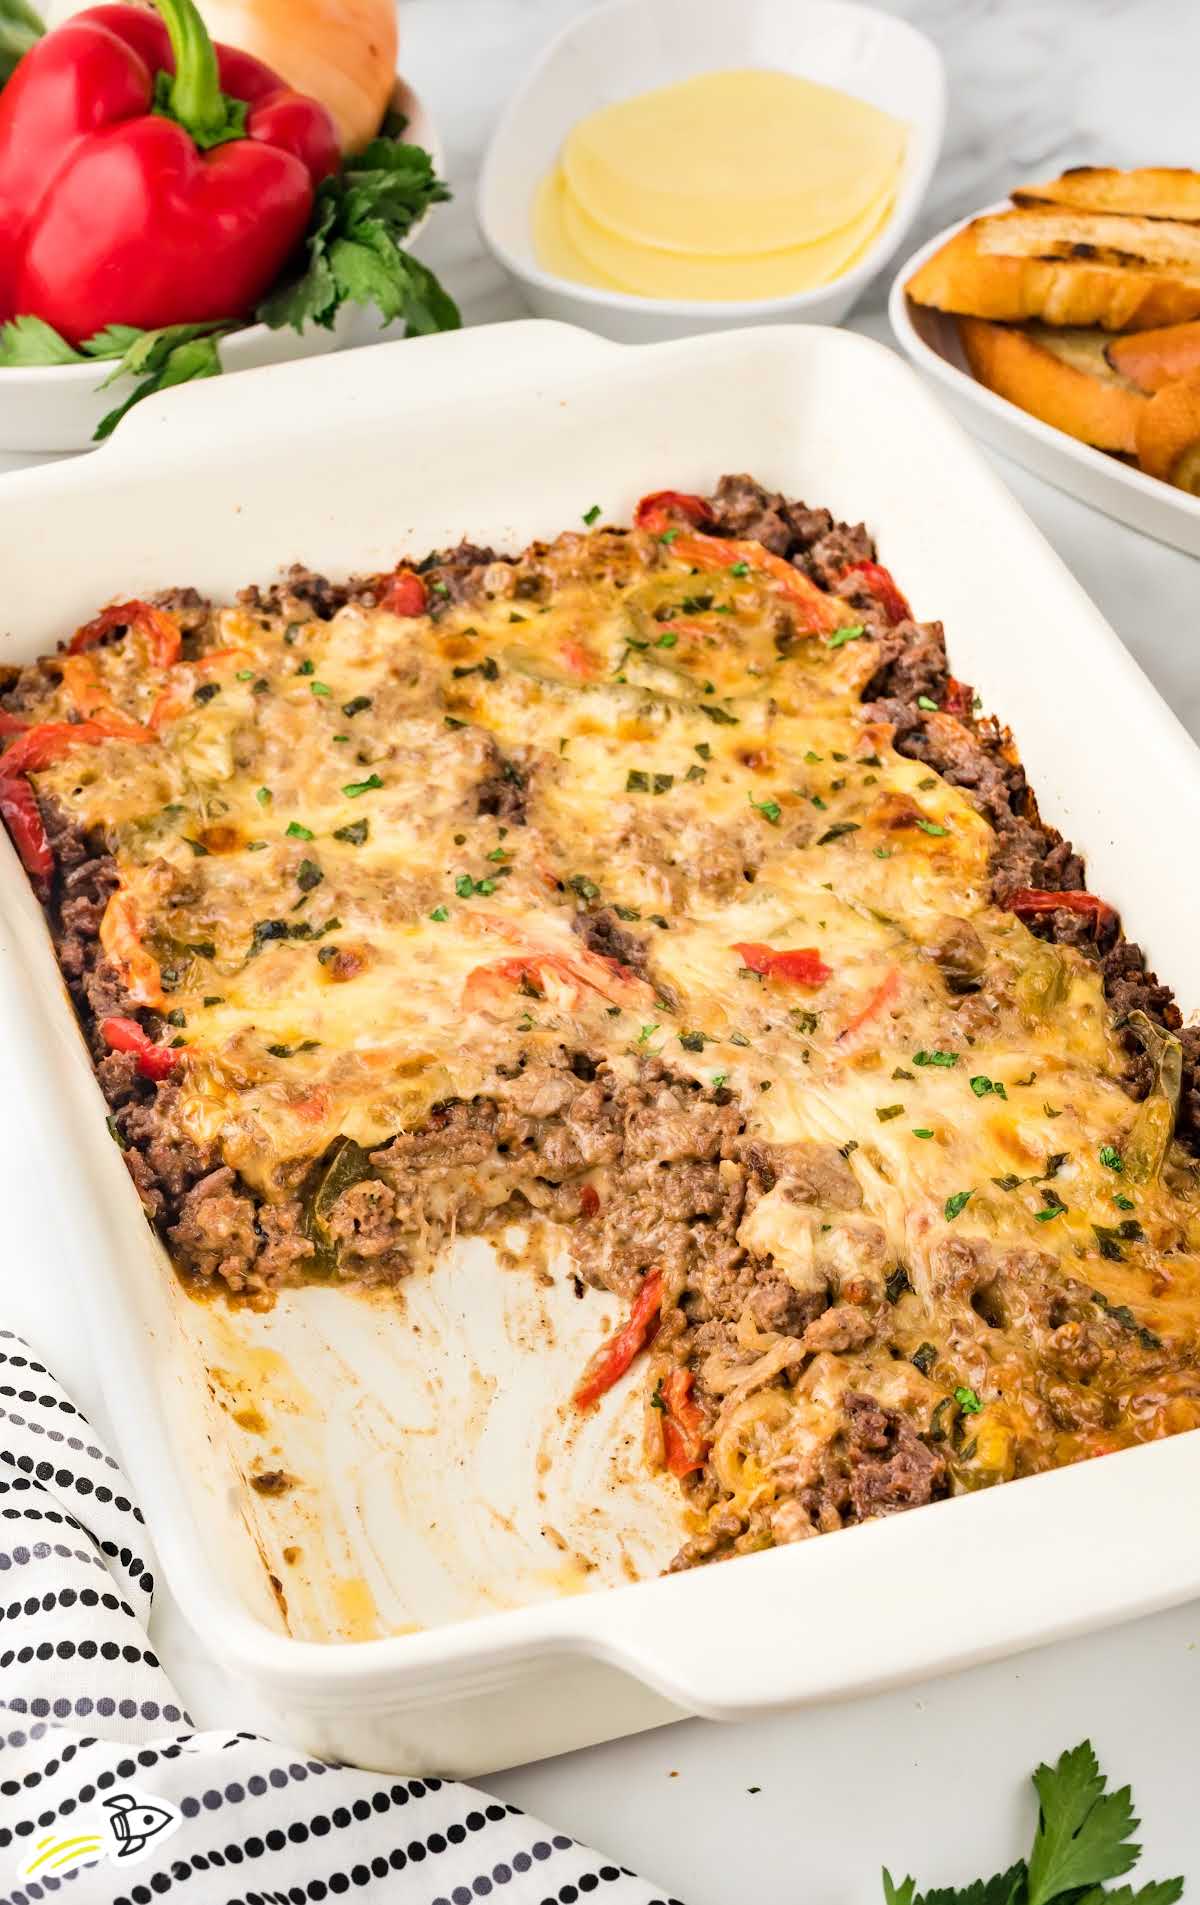 Philly Cheesesteak Casserole garnished with parsley in a baking dish